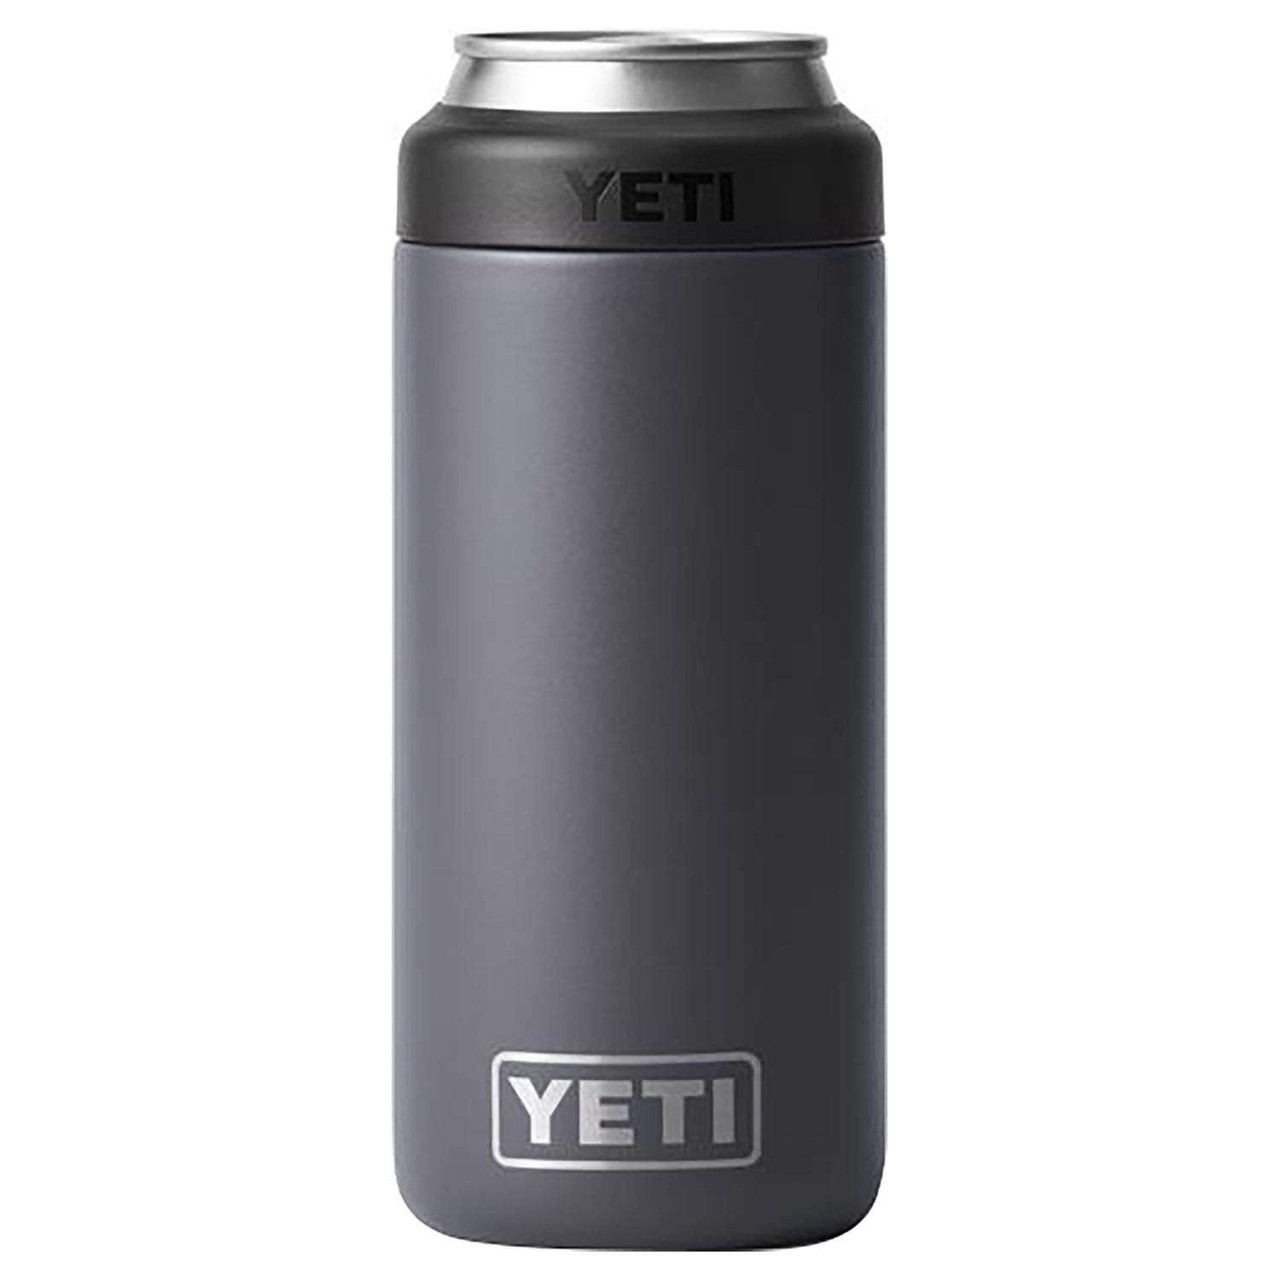 YETI Rambler 16 Oz Colster Tall Can Cooler in Charcoal